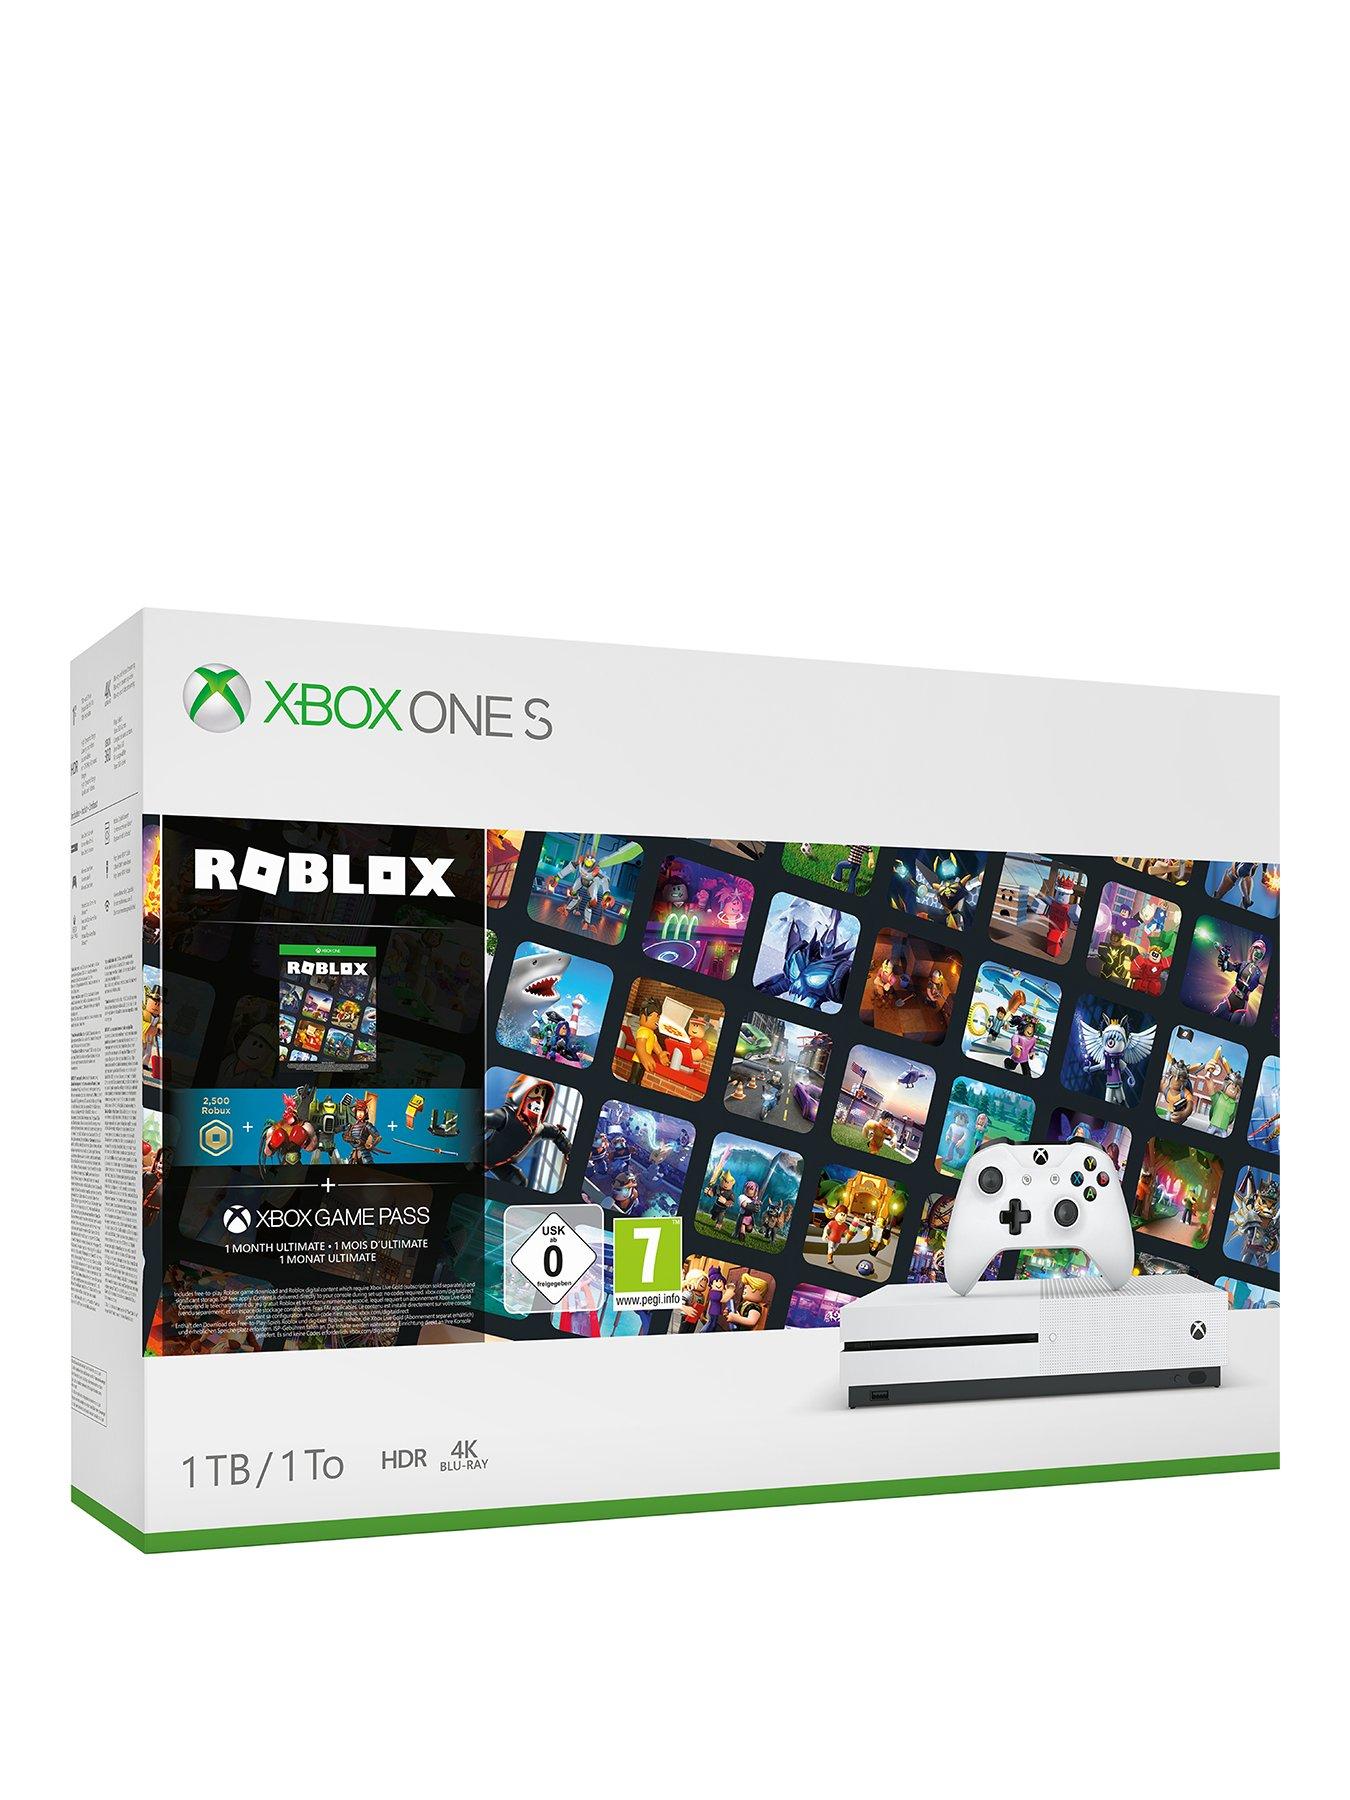 Is Roblox A Download On Xbox 1s